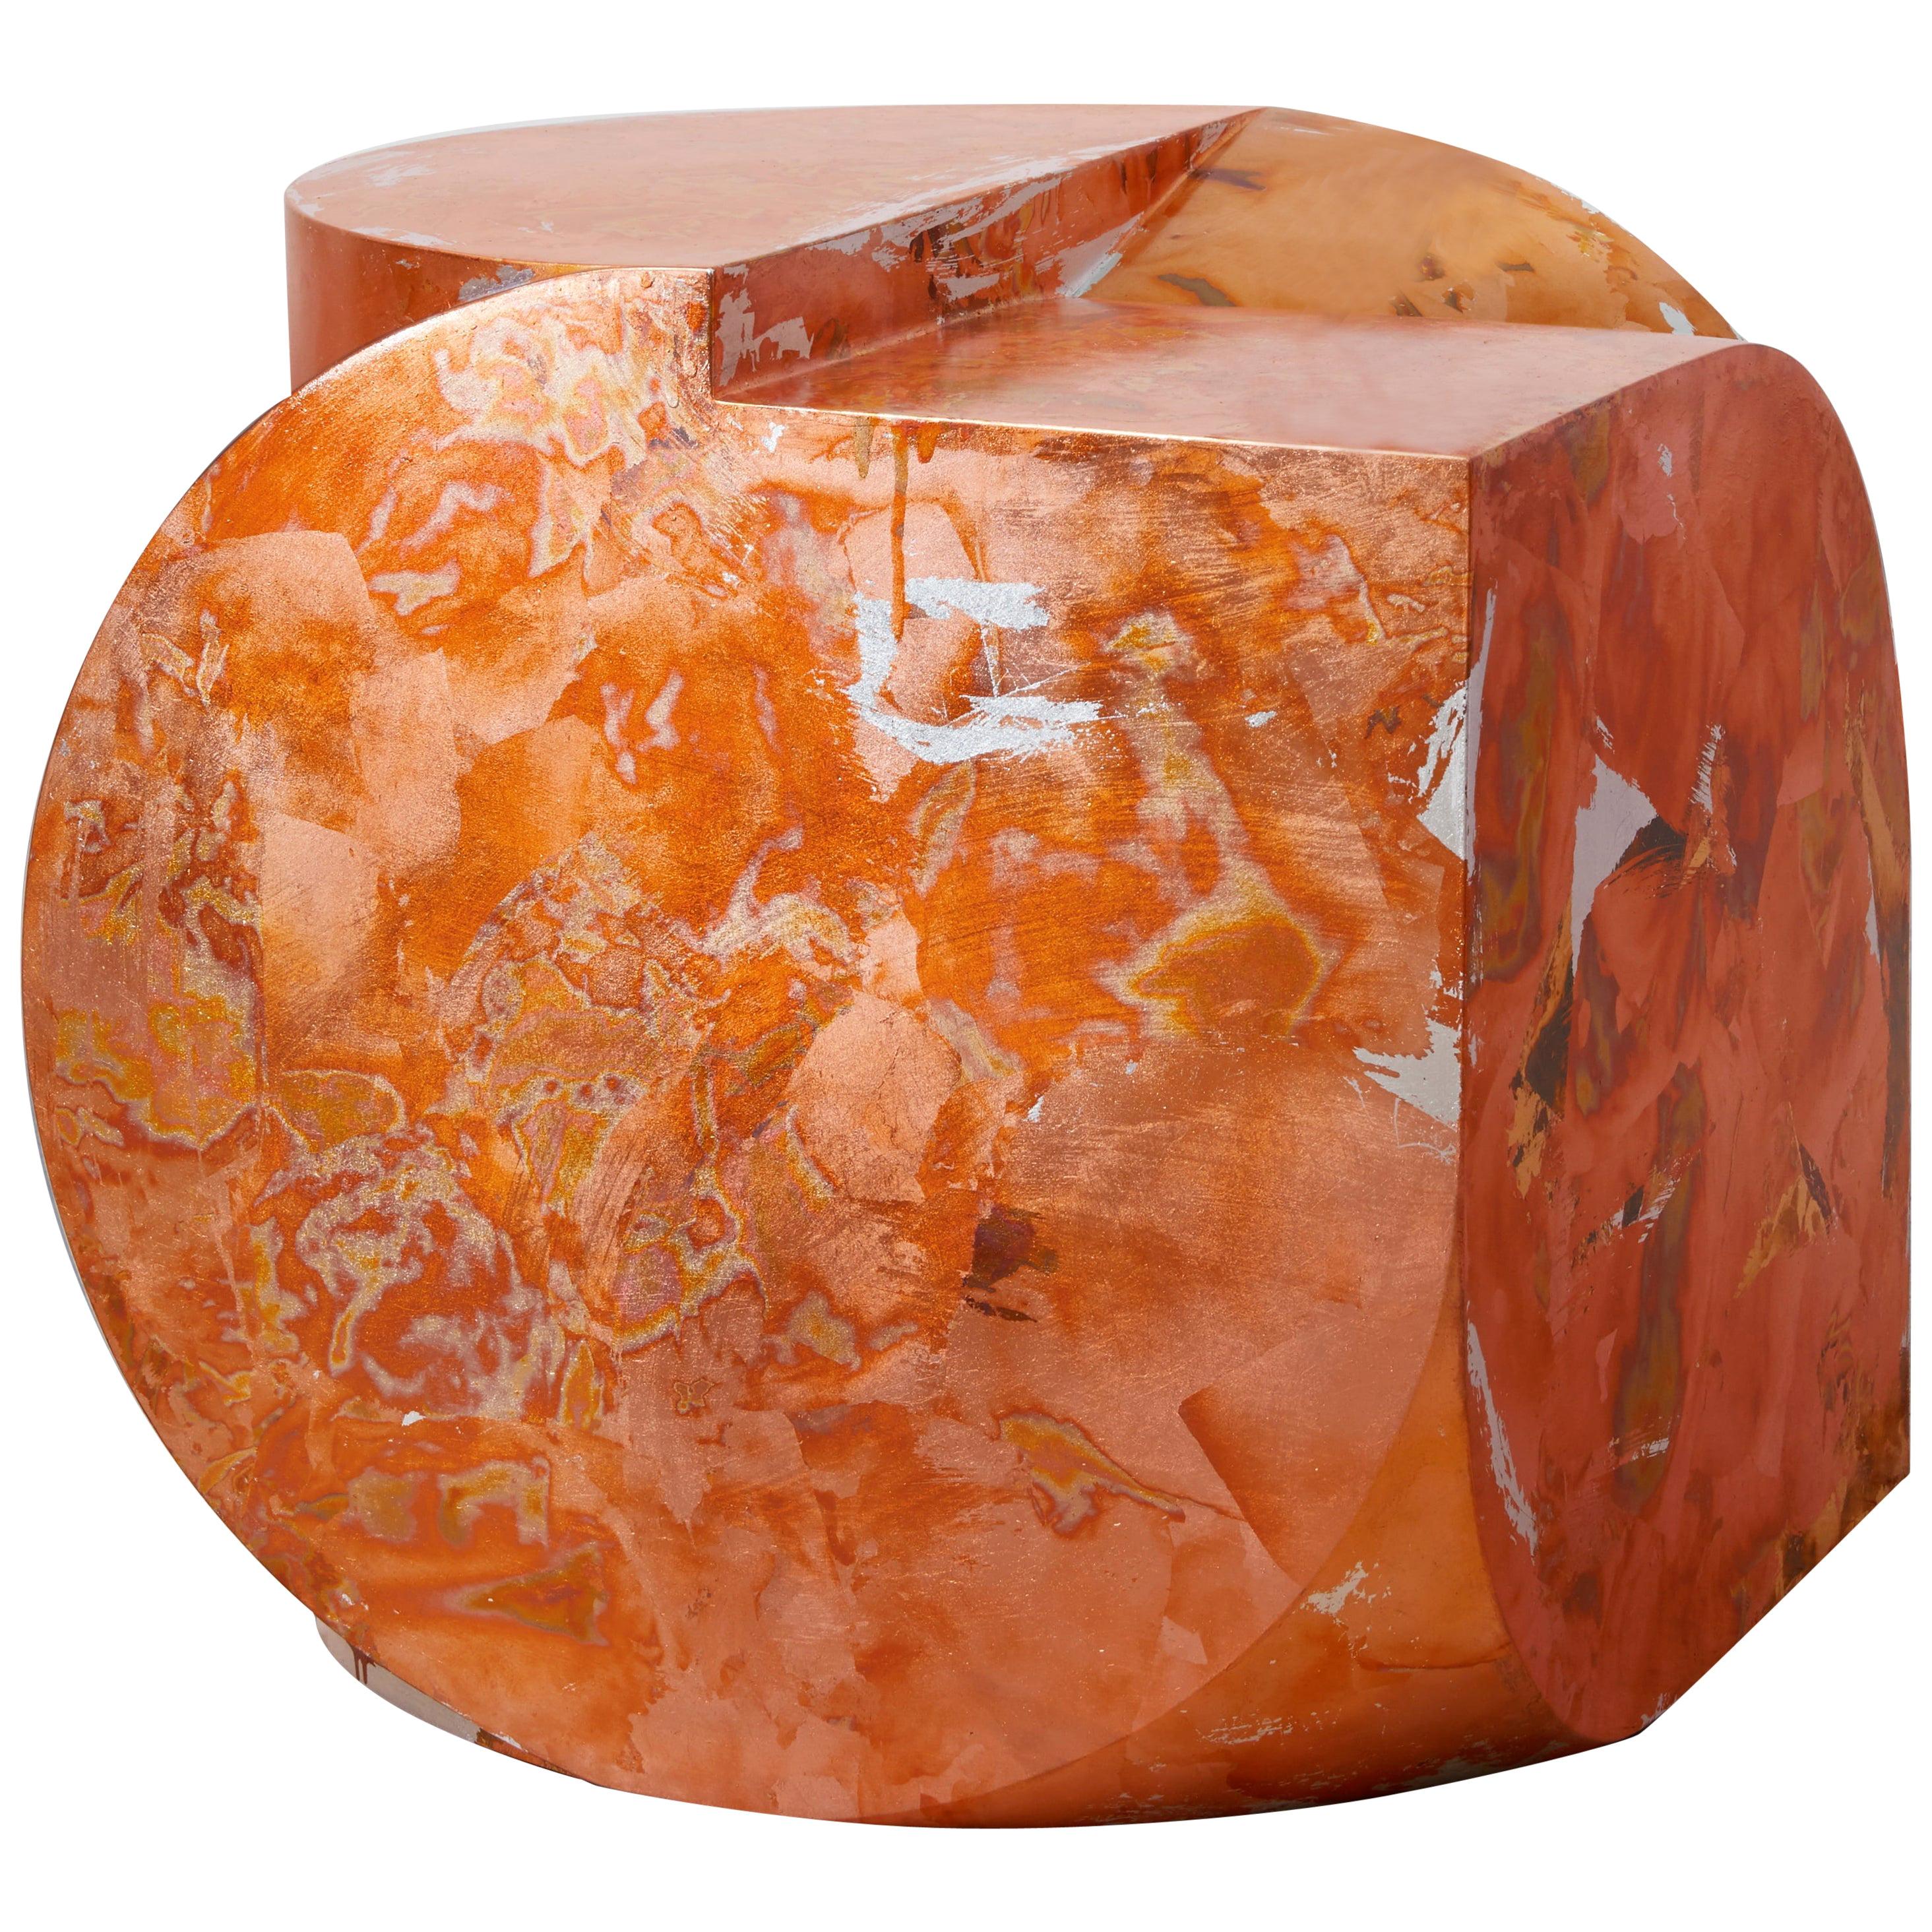 Daishi Luo, Copper Side Table or Stool, 'Monocrystal'